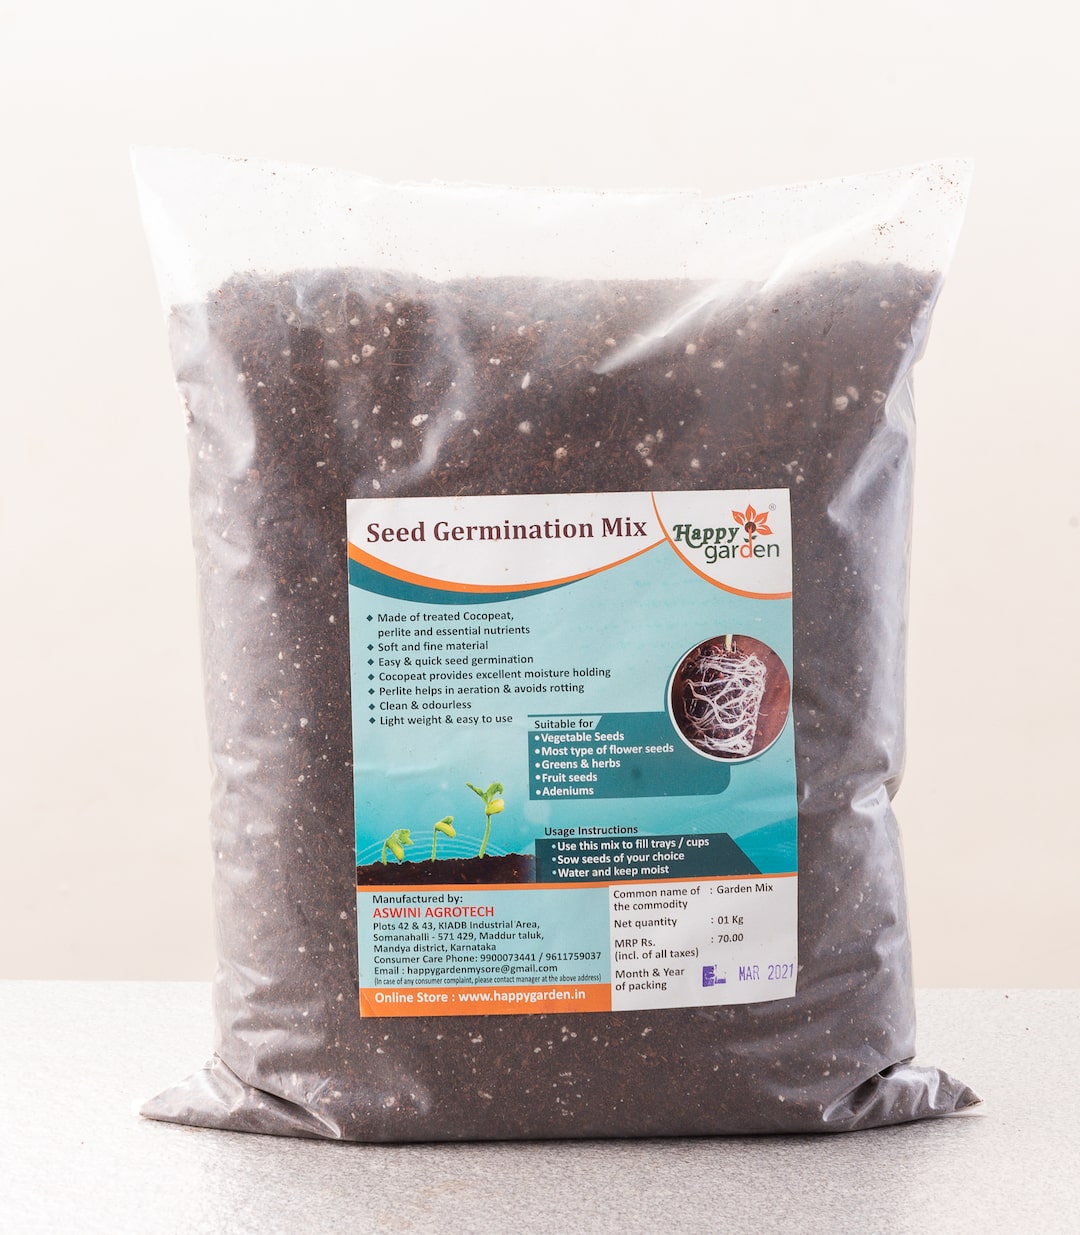 Seed germination mix formulated mix for germination cocopeat perlite essential nutrients online horticult 1